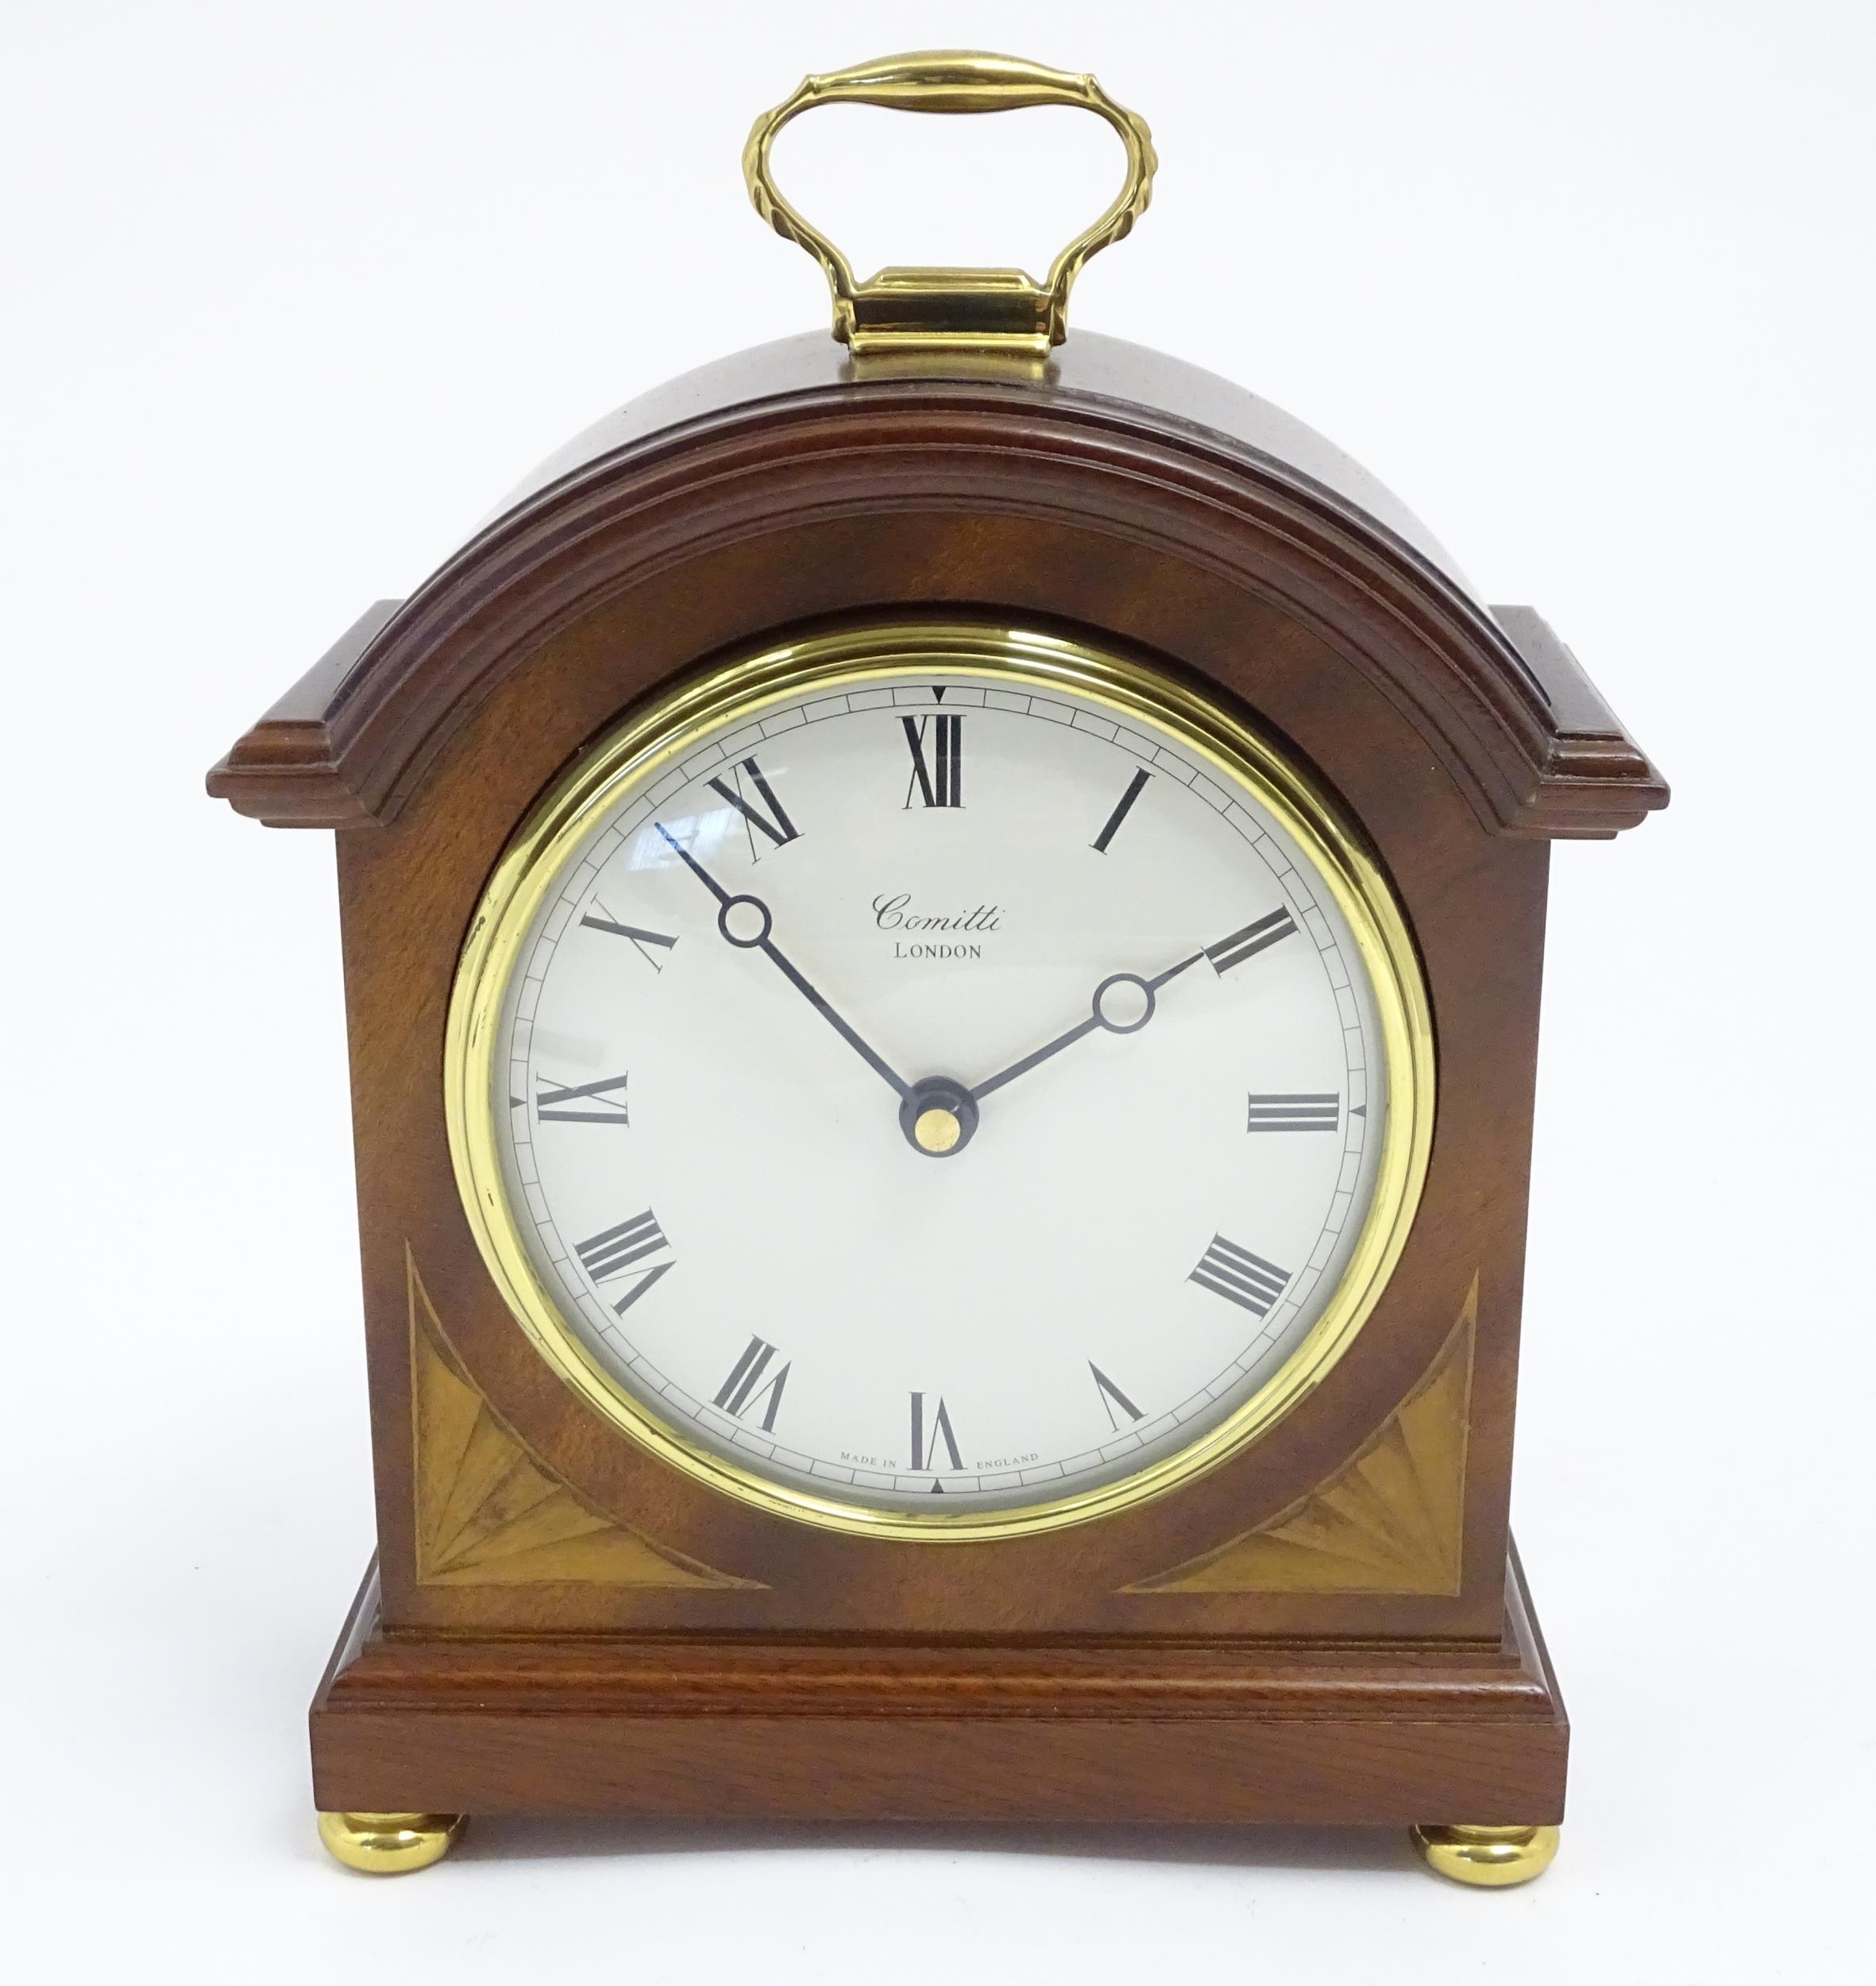 A Comitti battery powered mantel clock. Approx 8 1/2" high Please Note - we do not make reference to